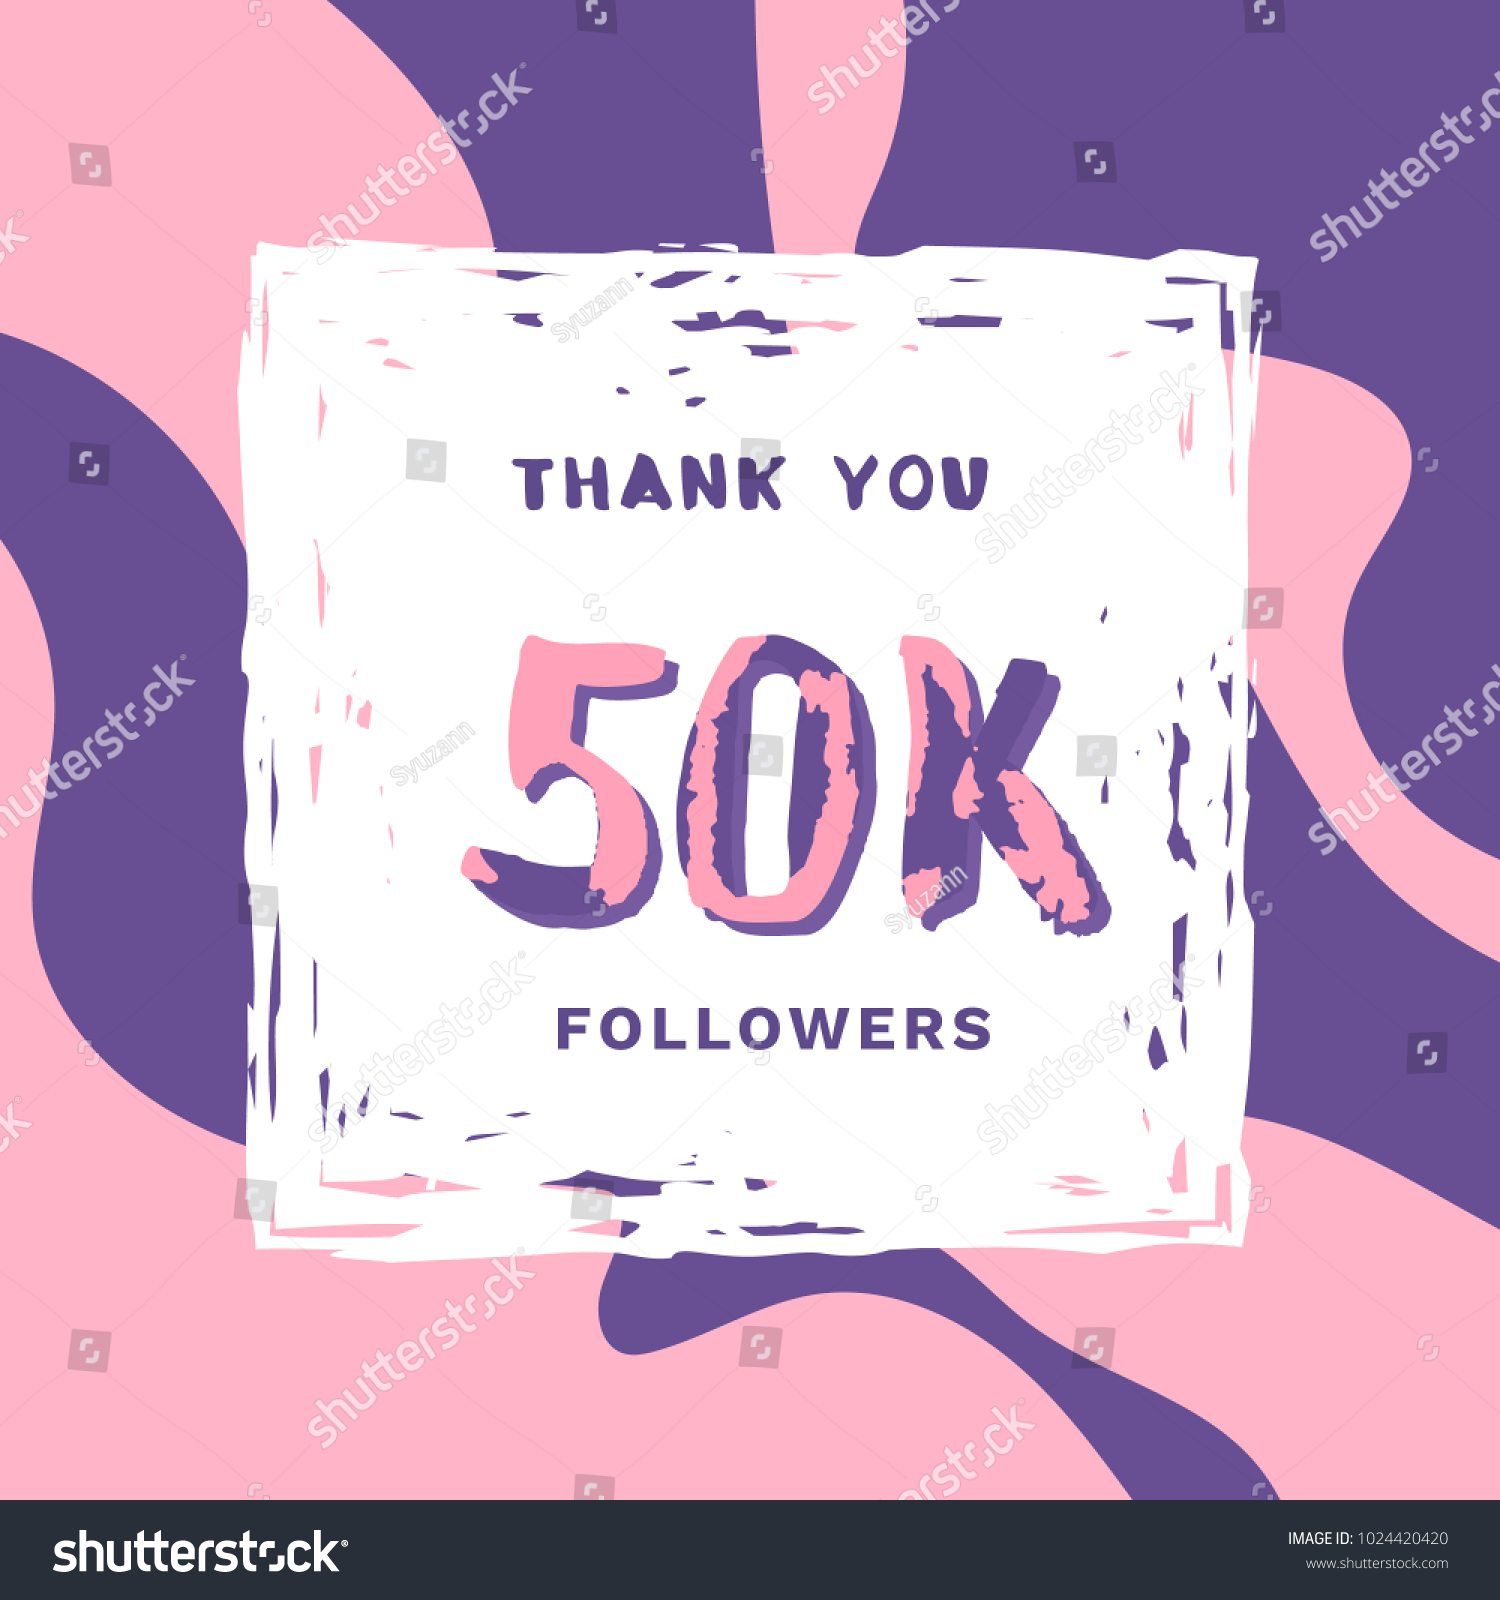 50k Followers Thank You Square Banner Stock Vector Royalty Free 1024420420 Shutterstock 3584